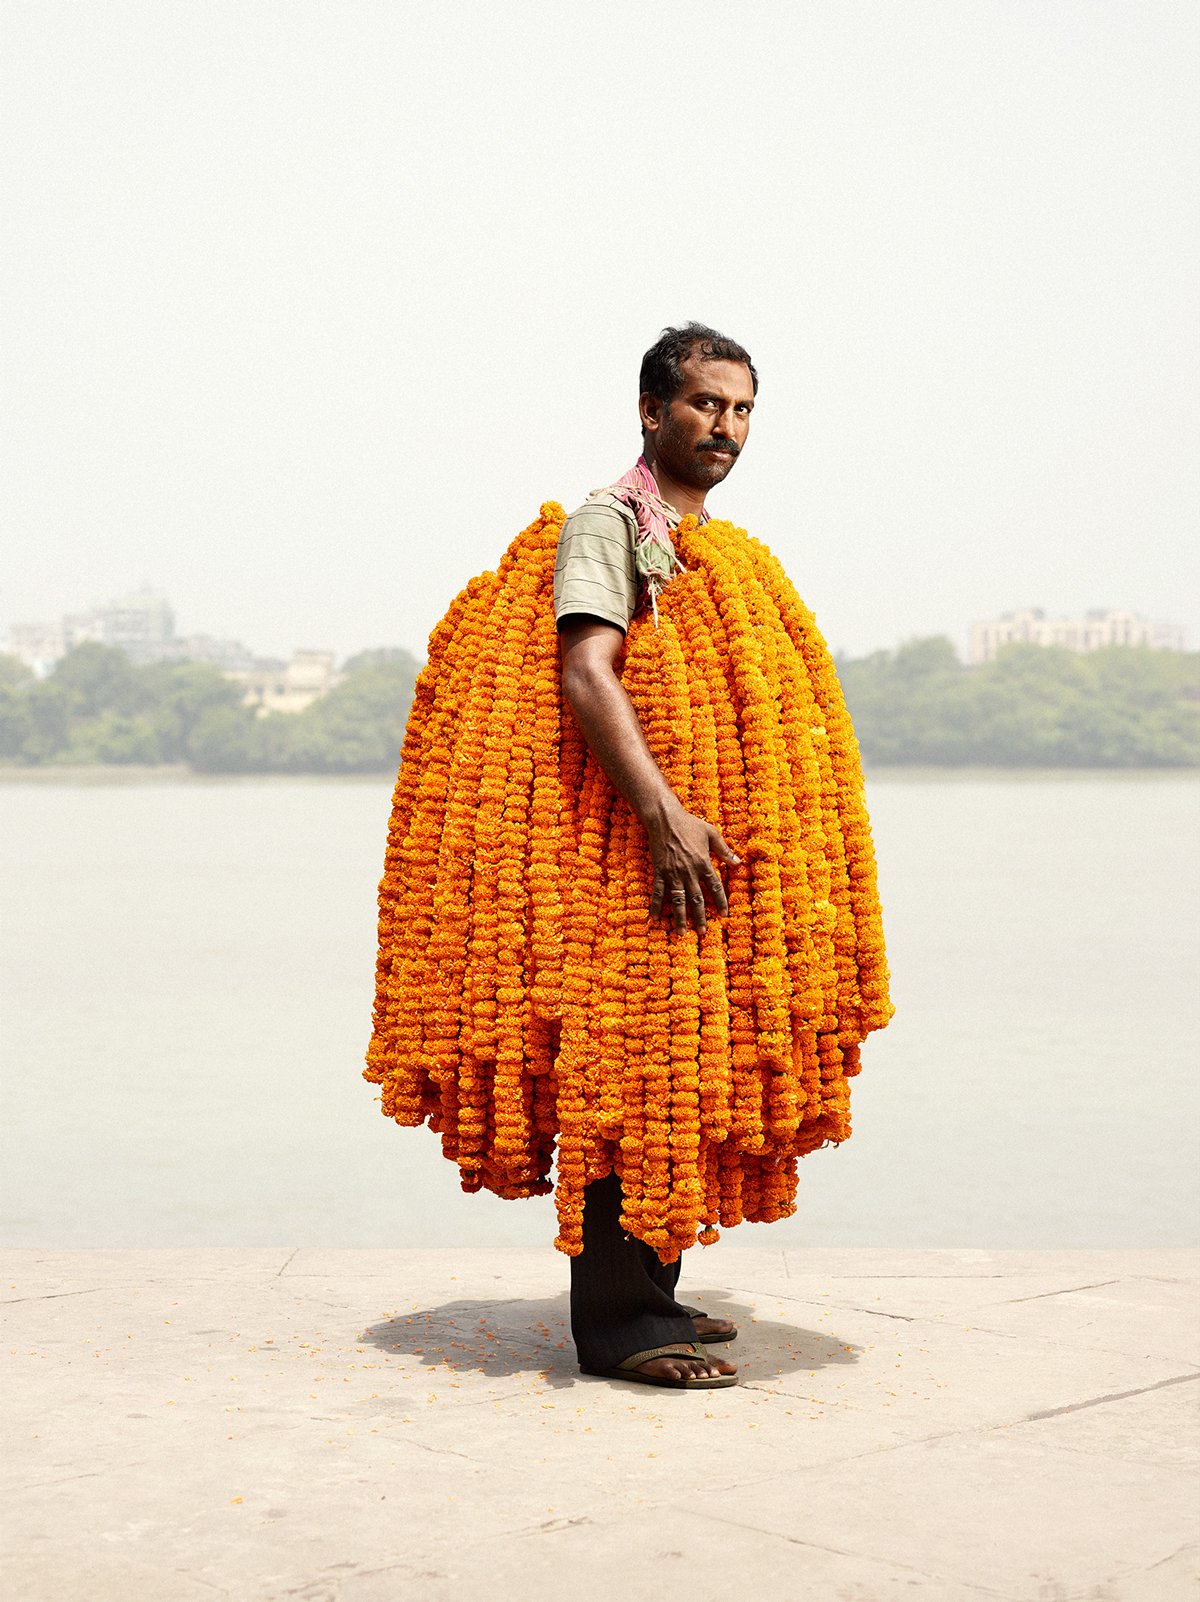 Flower Man: The Men Who Sell Flowers in India